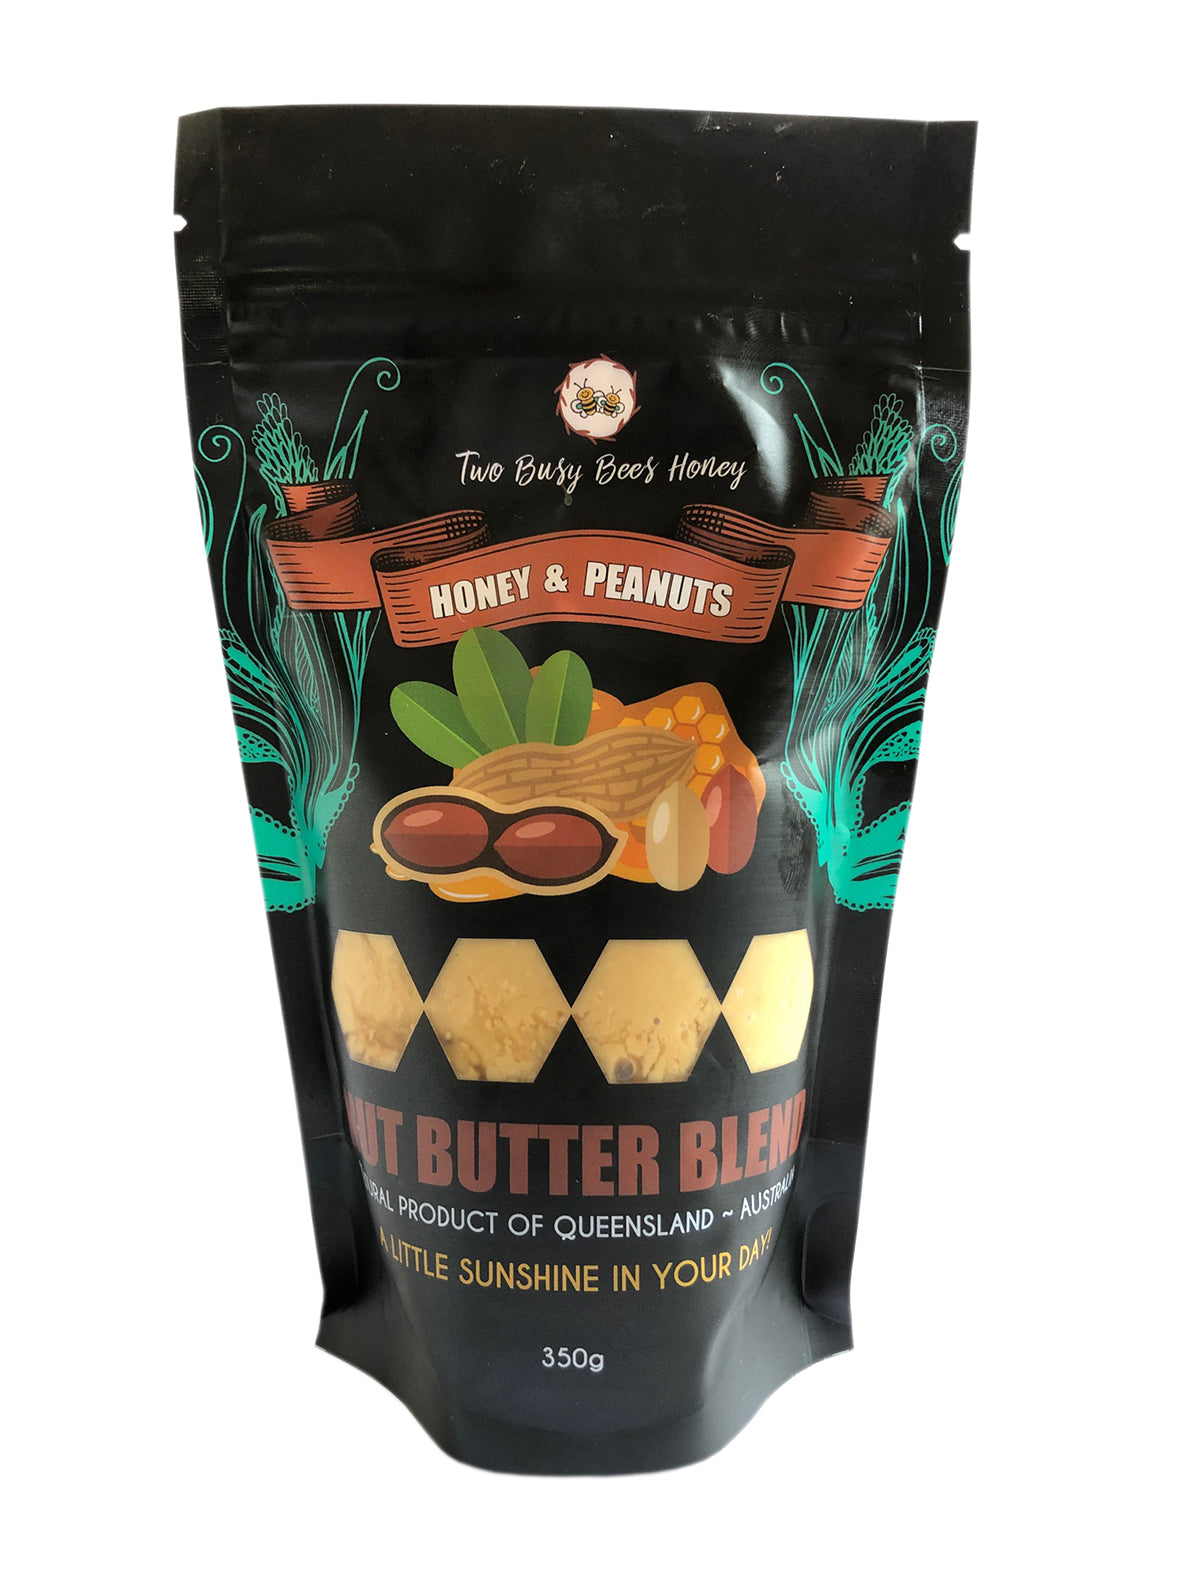 New in store :: Honey and Peanuts - Nut Butter Blend - Pouch Pack